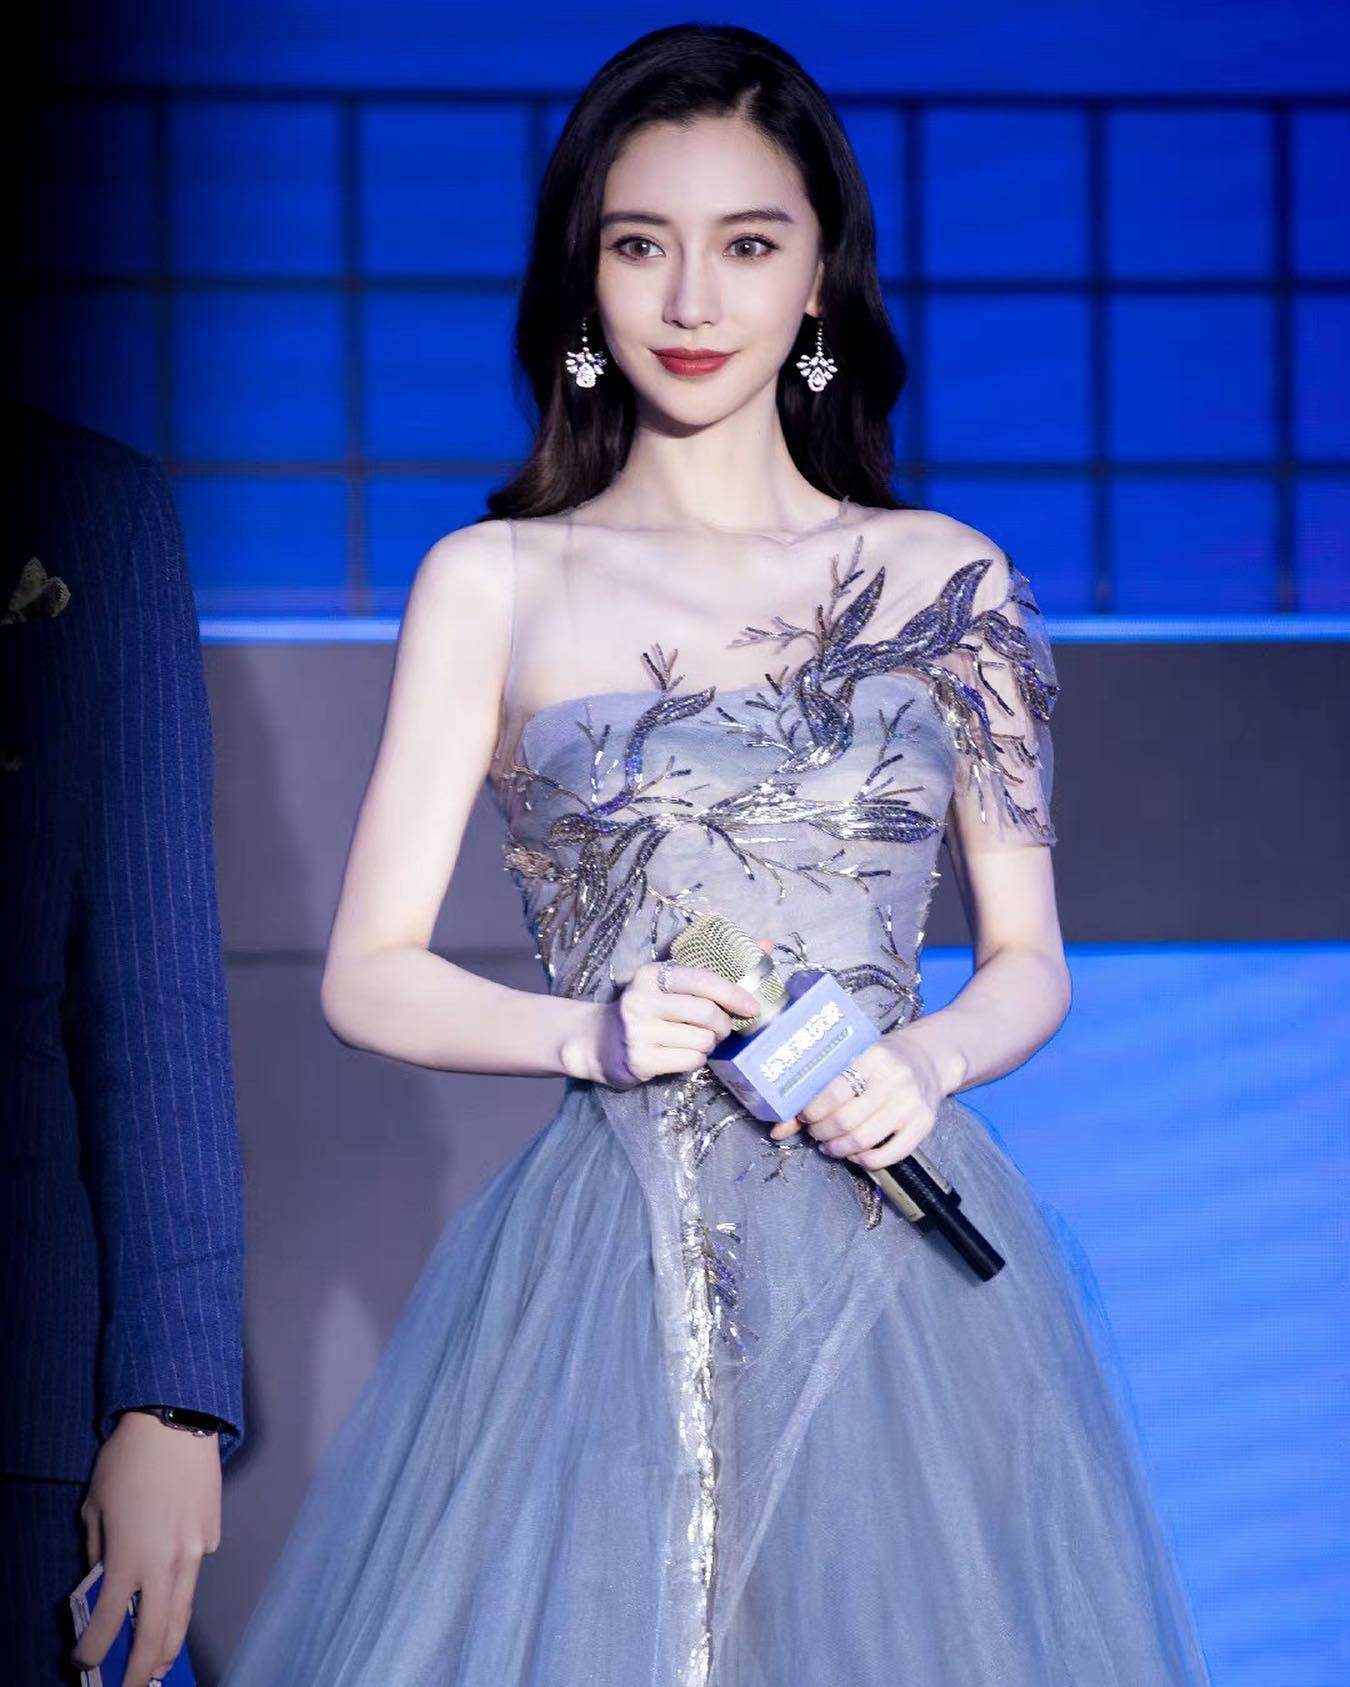 Read on for Angelababy’s top beauty tips. Photo: @luv_u_angelababy/Instagram